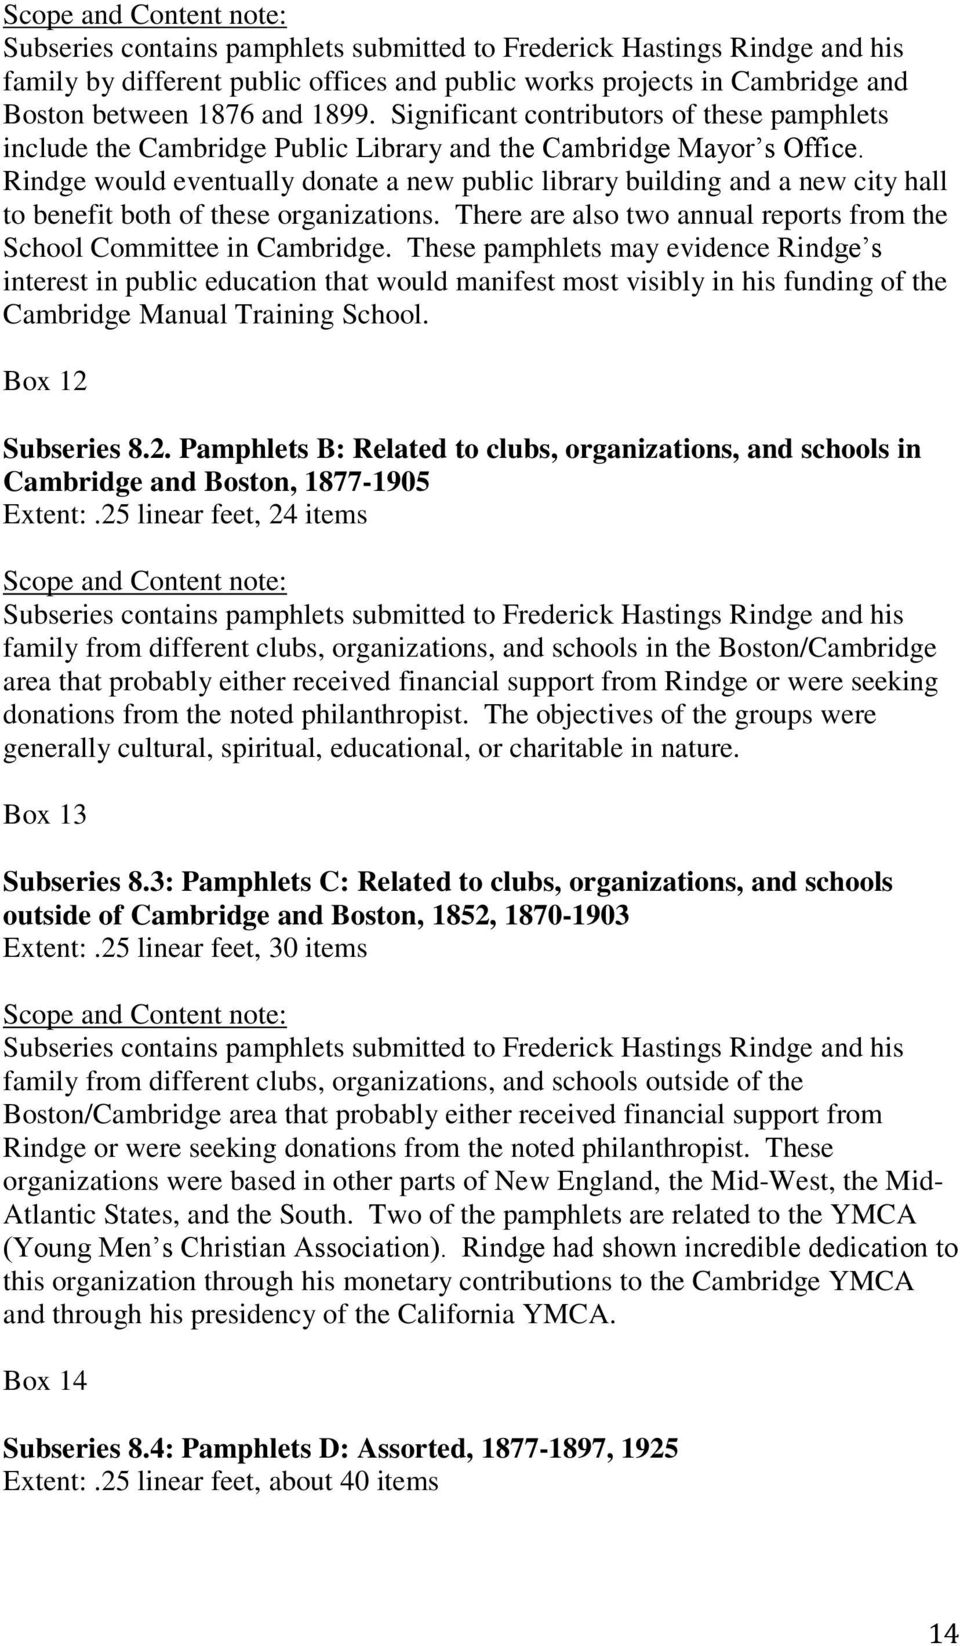 Rindge would eventually donate a new public library building and a new city hall to benefit both of these organizations. There are also two annual reports from the School Committee in Cambridge.